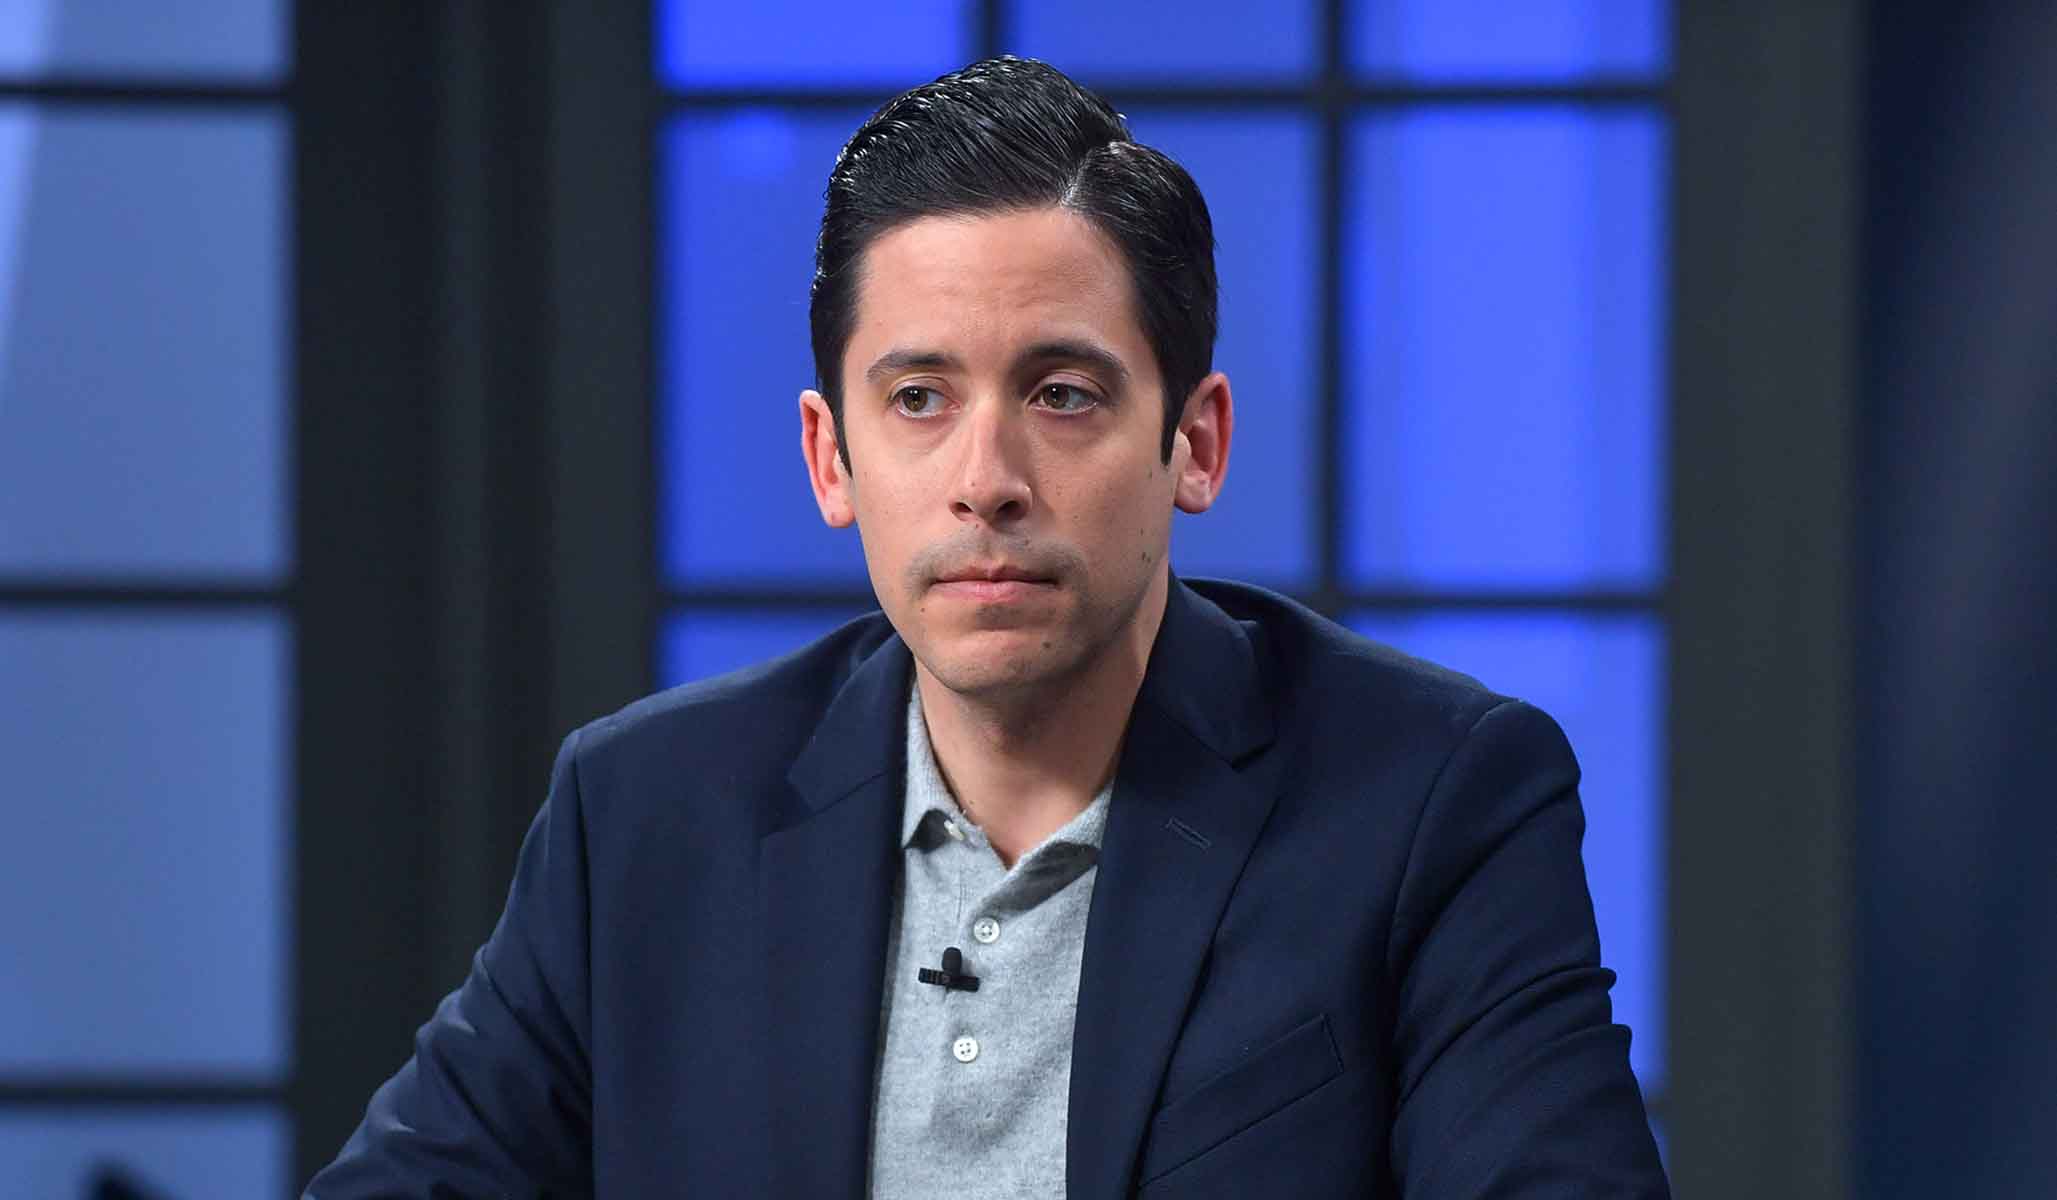 About Michael Knowles’s CPAC Speech National Review